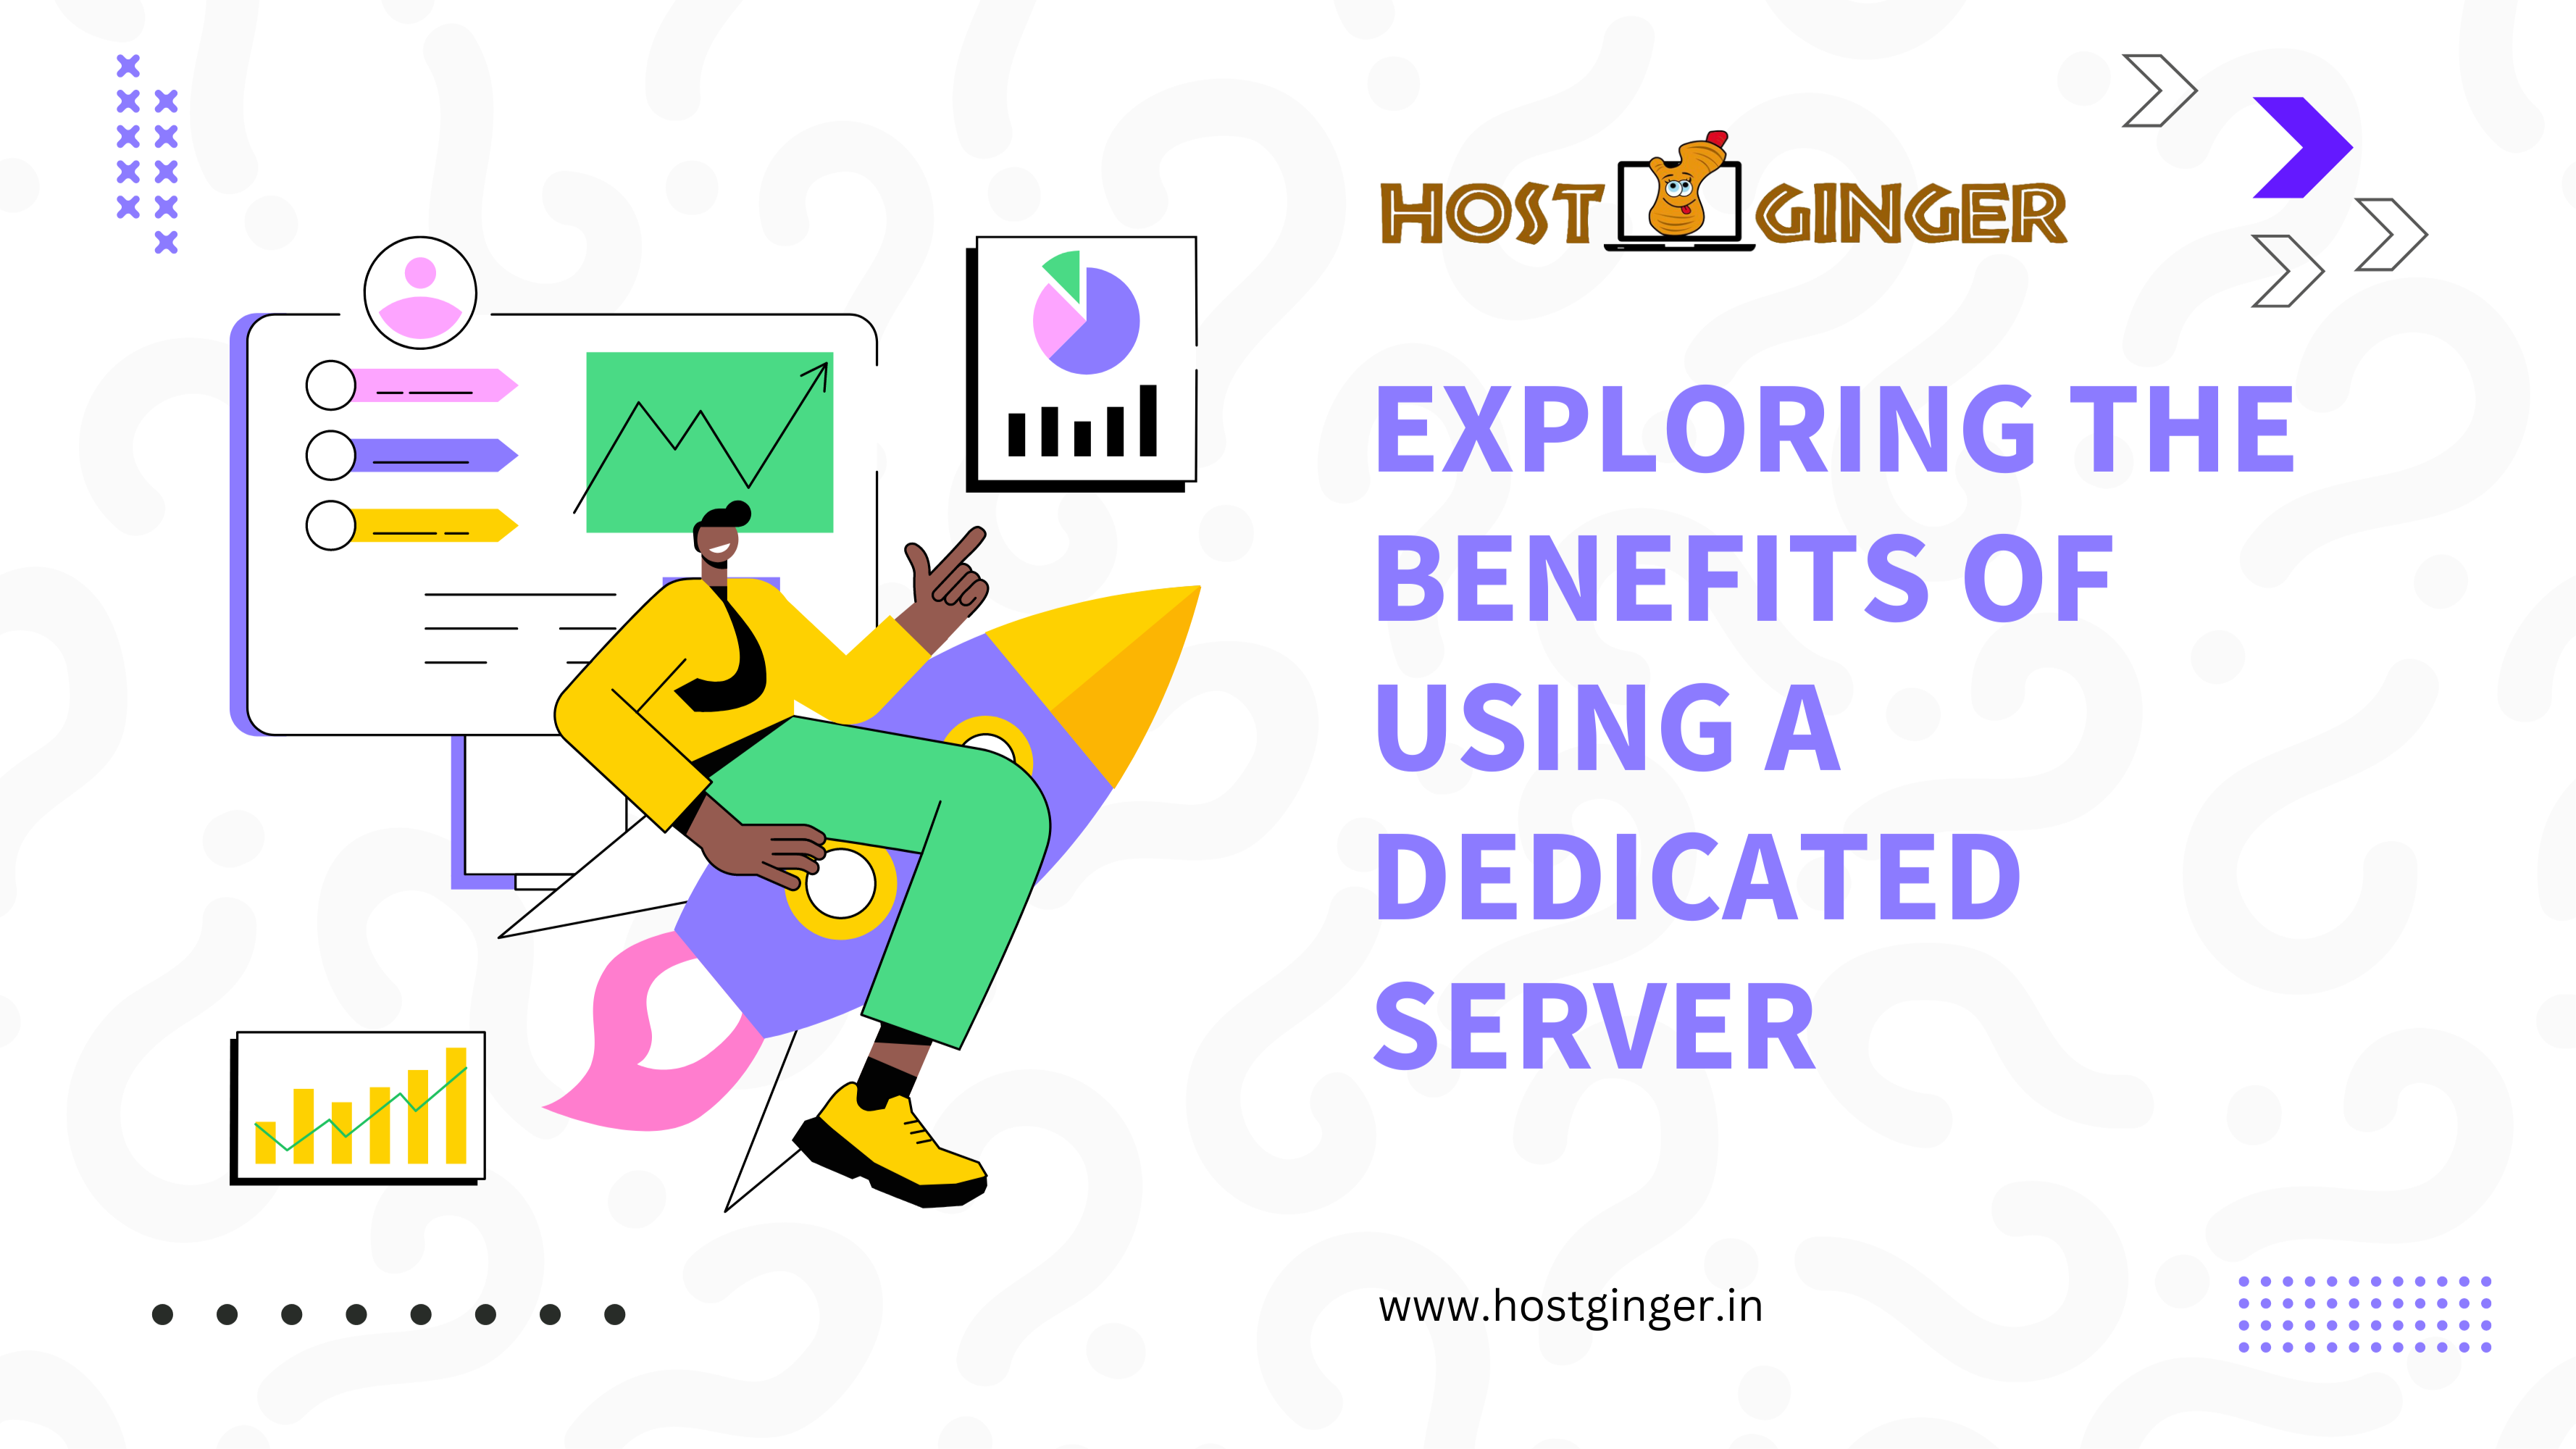 Benefits of Using a Dedicated Server